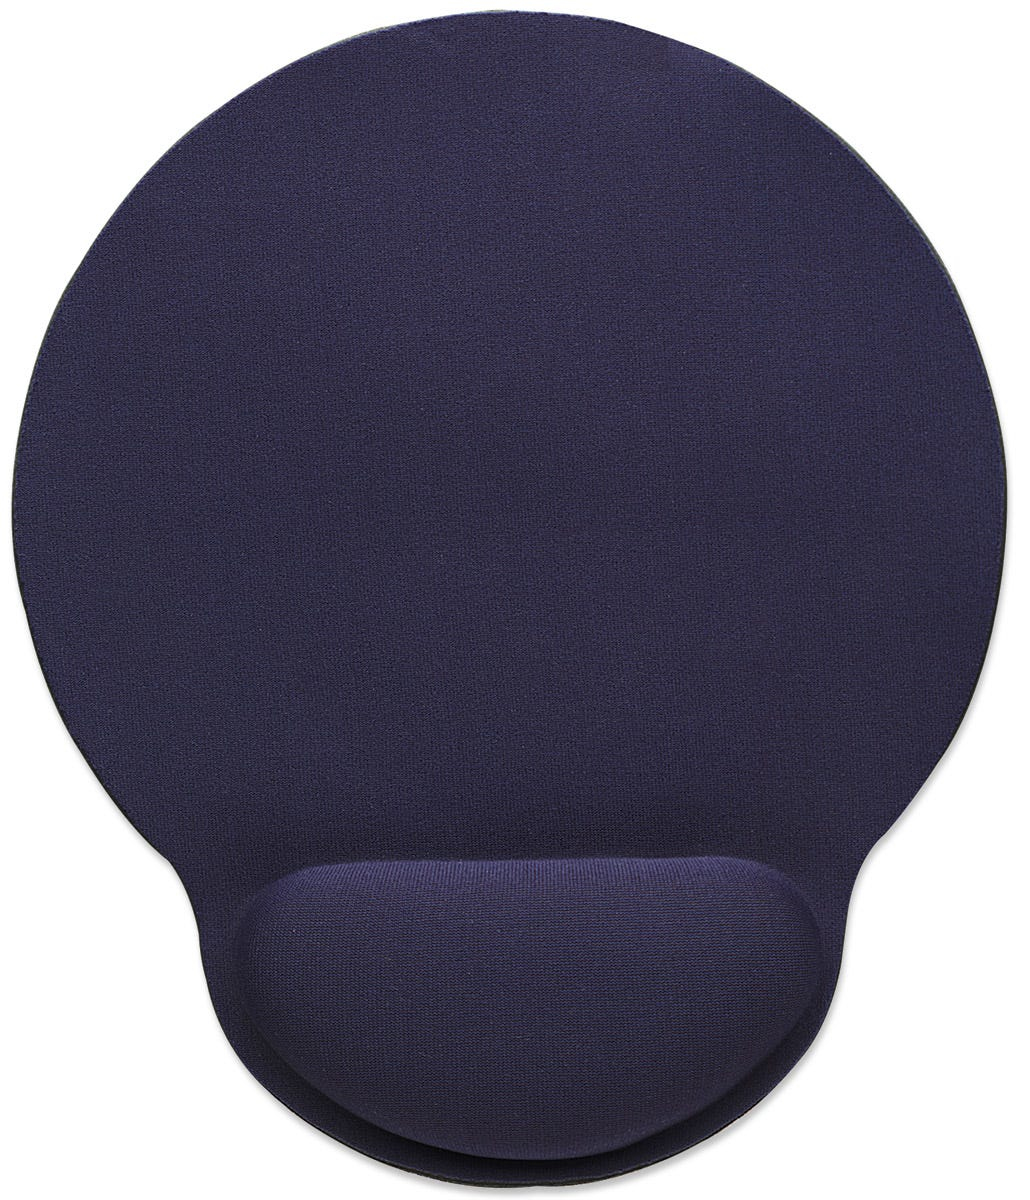 Manhattan Wrist Gel Support Pad and Mouse Mat, Blue, 241 x 203 x 40 mm, non slip base, Lifetime Warranty, Card Retail Packaging